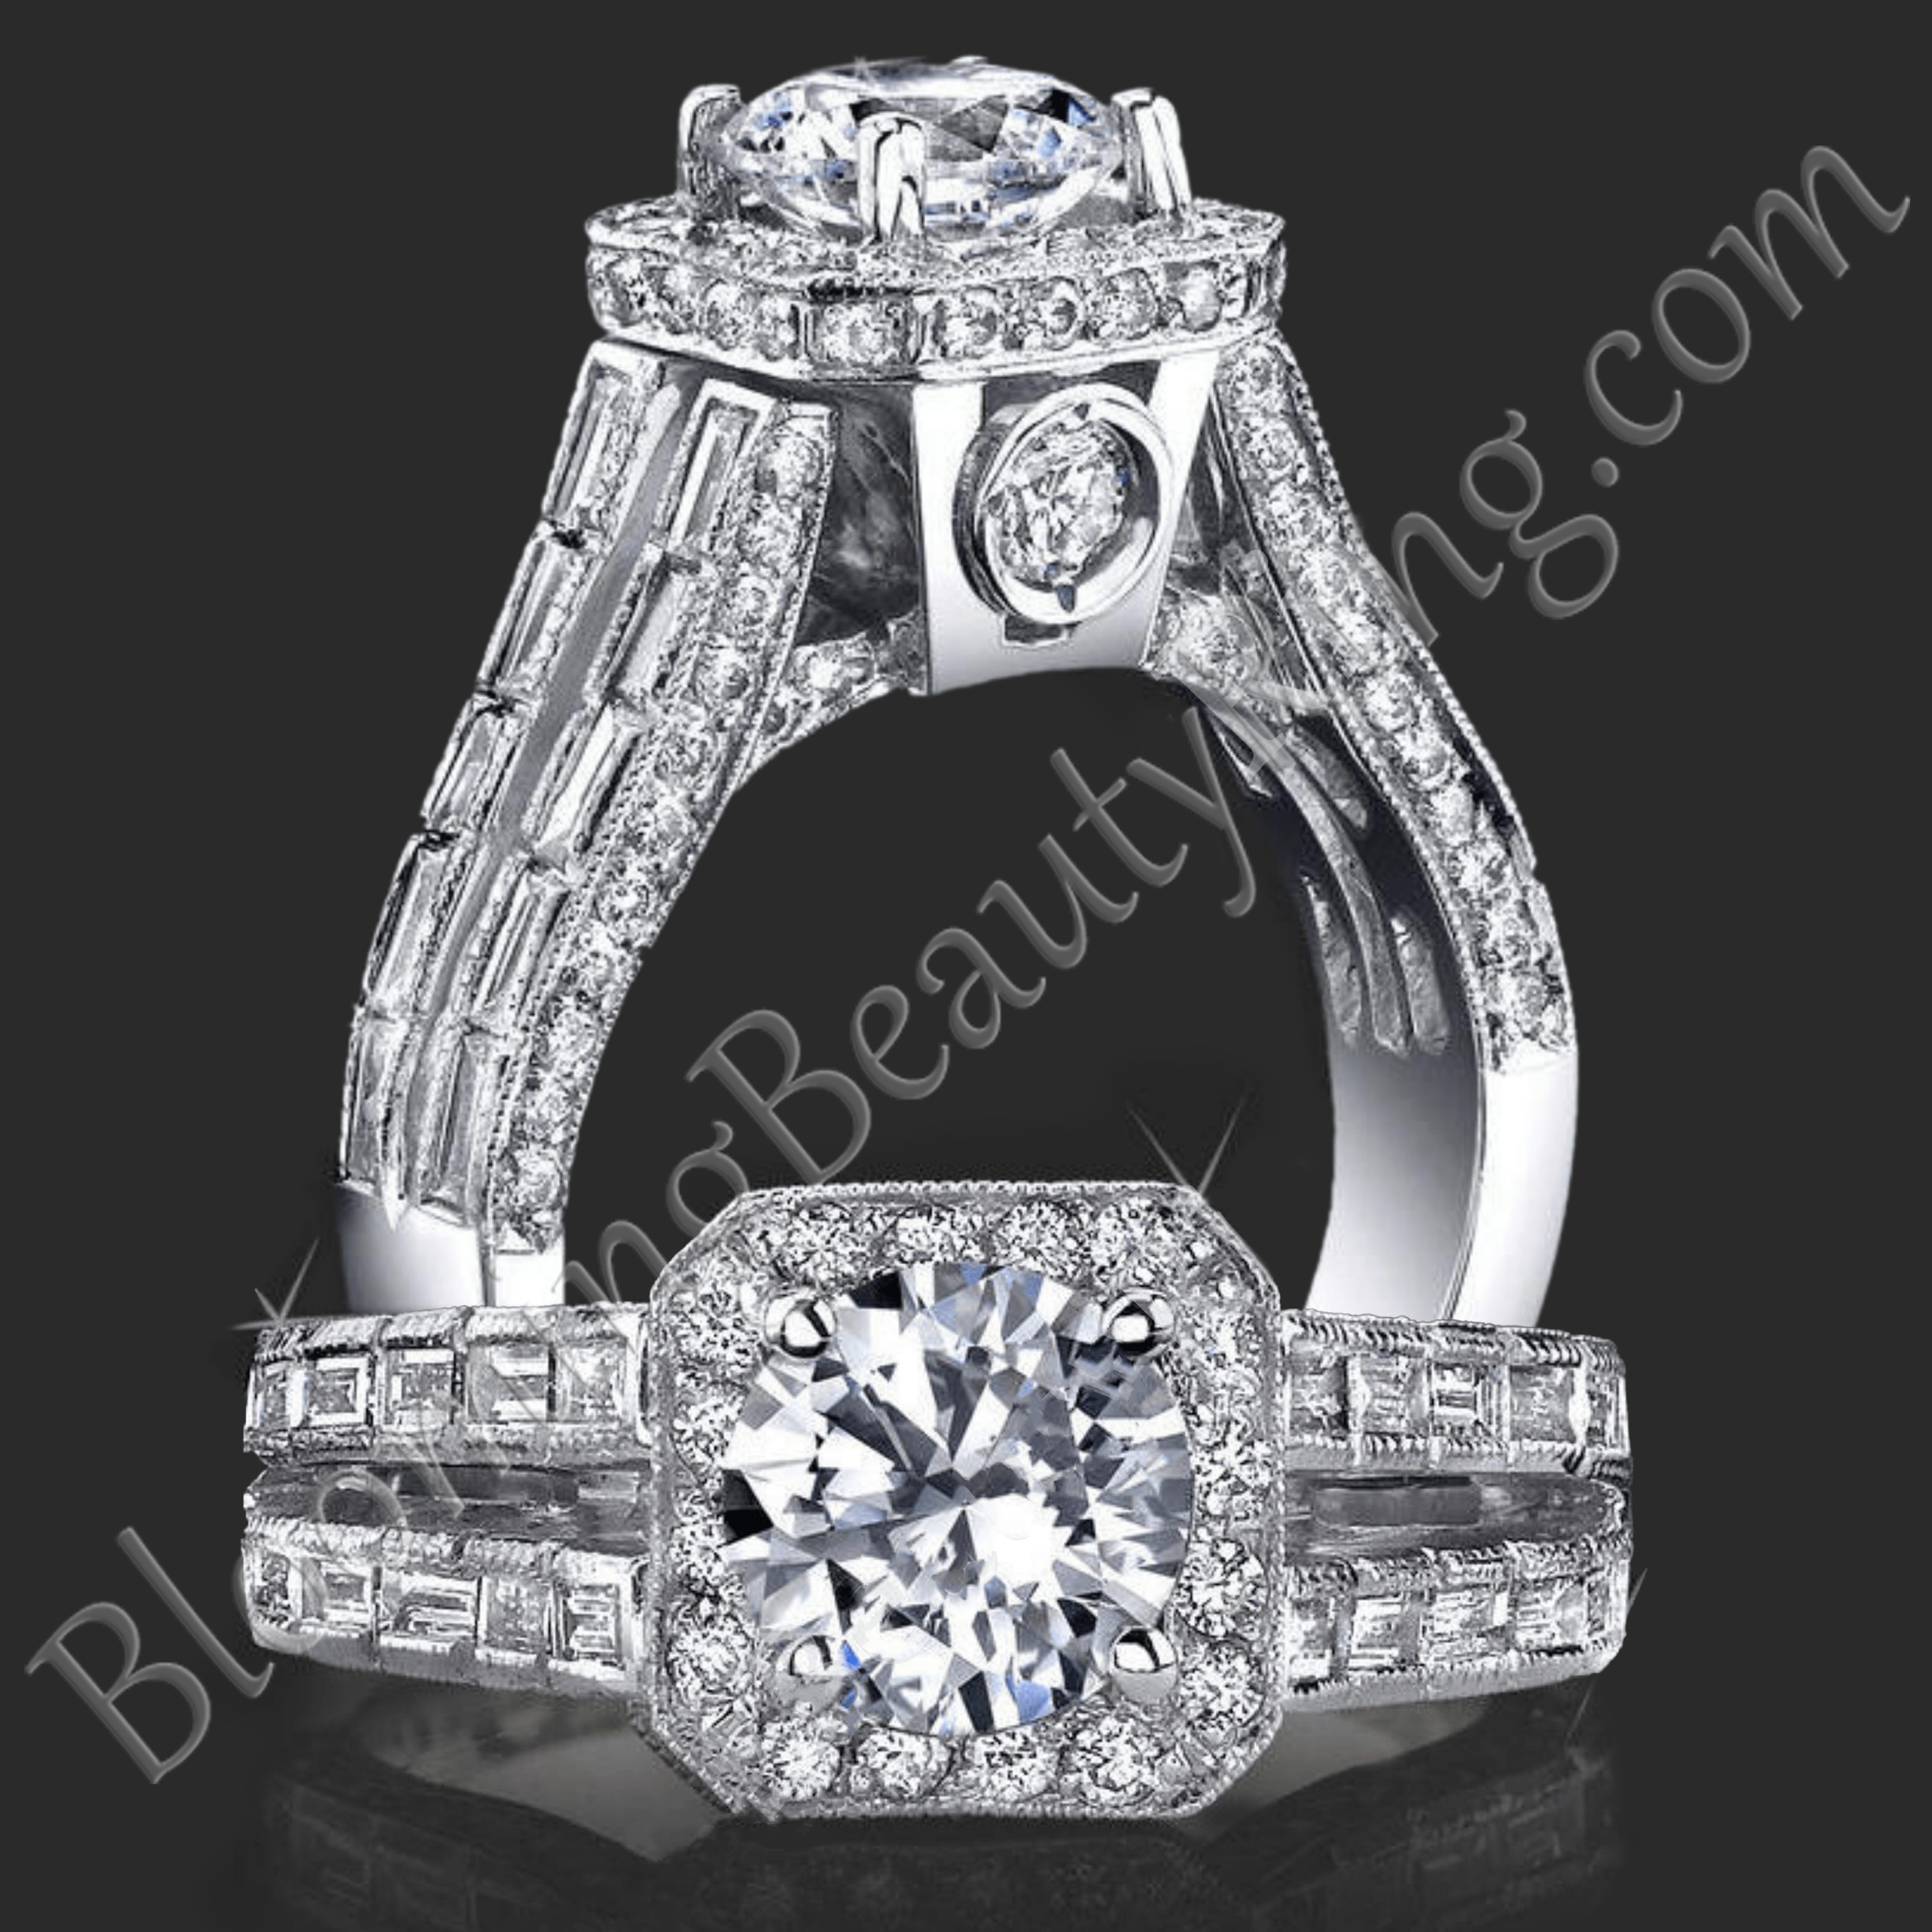 Baguette and Round Halo Style Diamond Engagement Ring with Large Peekaboo Side Diamonds – bbr388-1